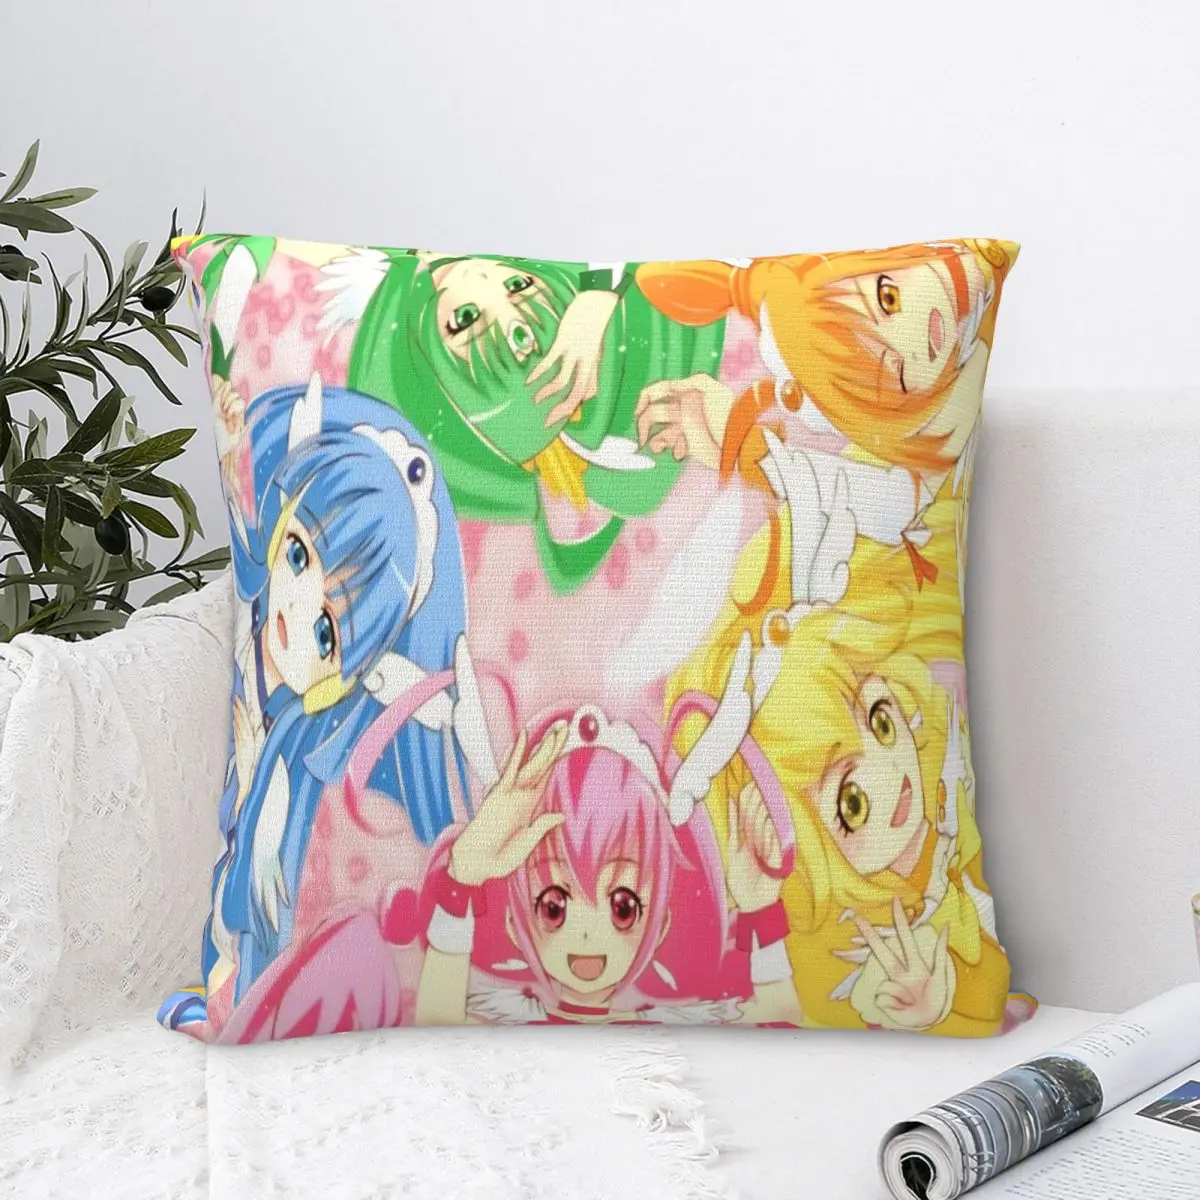 

Smile All In One Polyester Cushion Cover Pretty Cure Precure Princess Anime Sofa Office Decorative Coussincase Throw Pillowcase